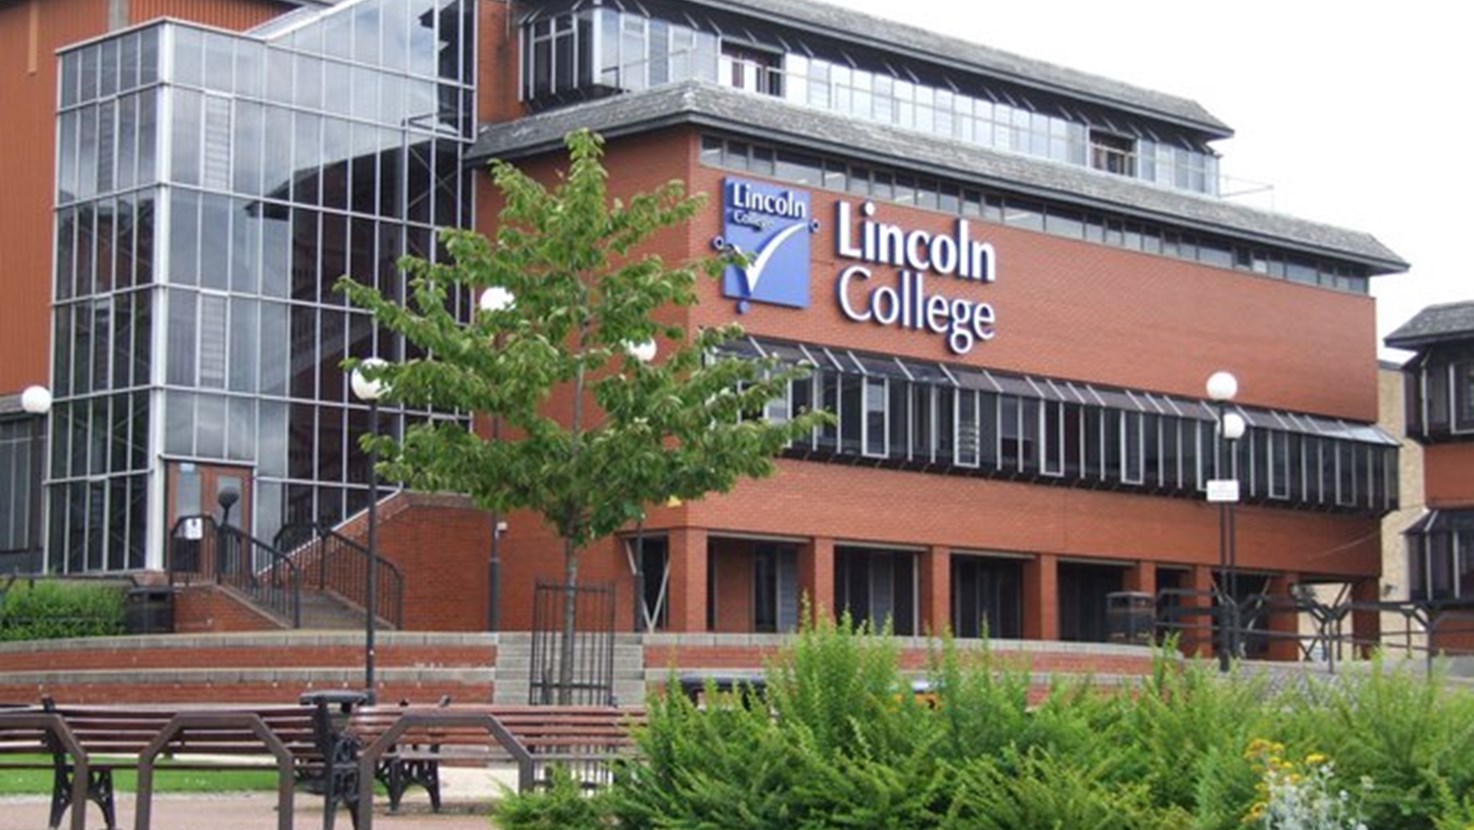 View all of the events and meetings that PCC Marc Jones attended or hosted at Lincoln College in 2022